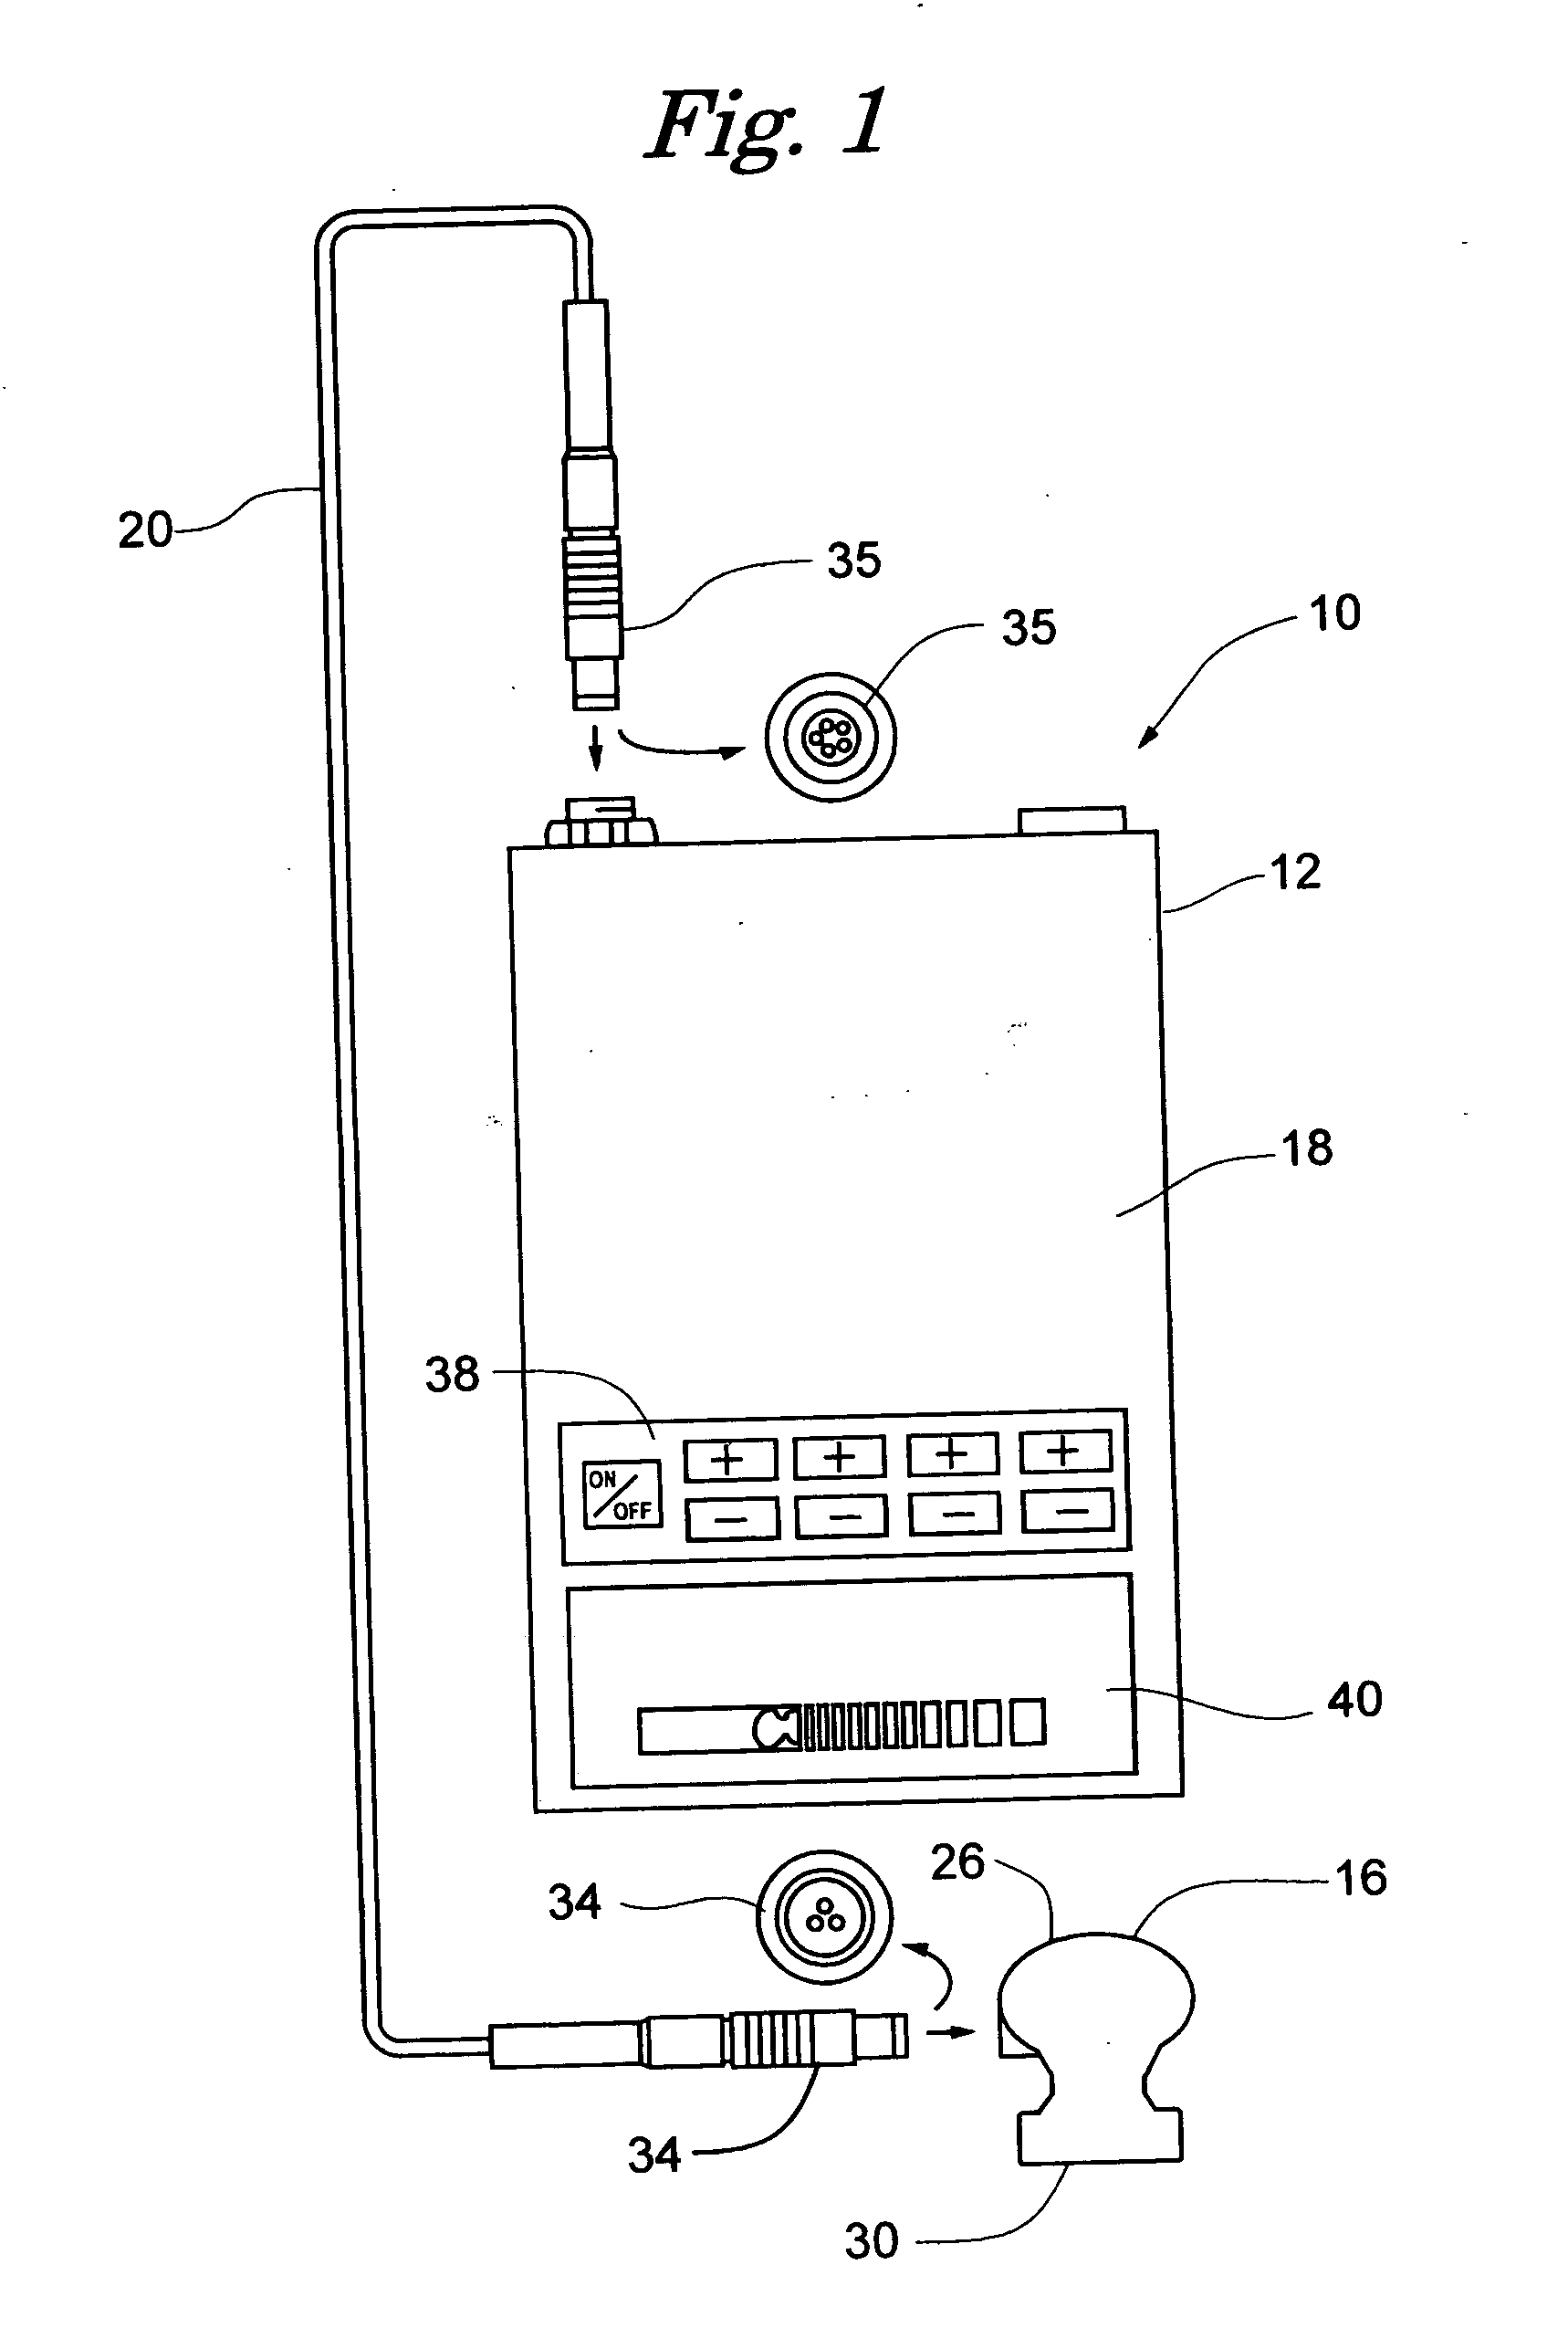 Ultrasound therapeutic device